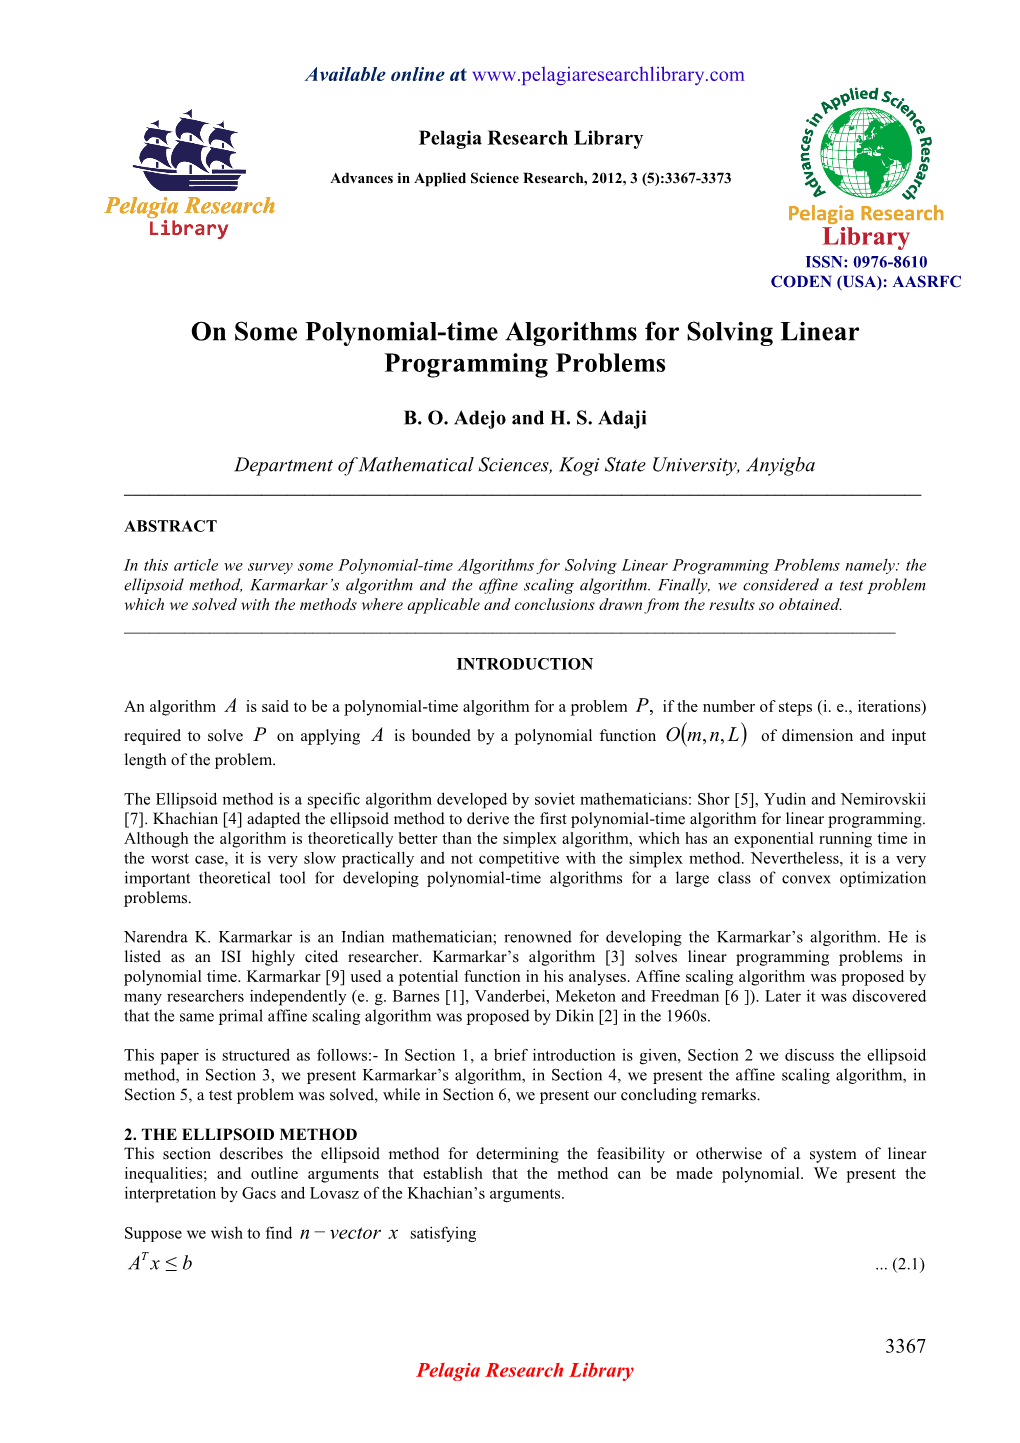 On Some Polynomial-Time Algorithms for Solving Linear Programming Problems